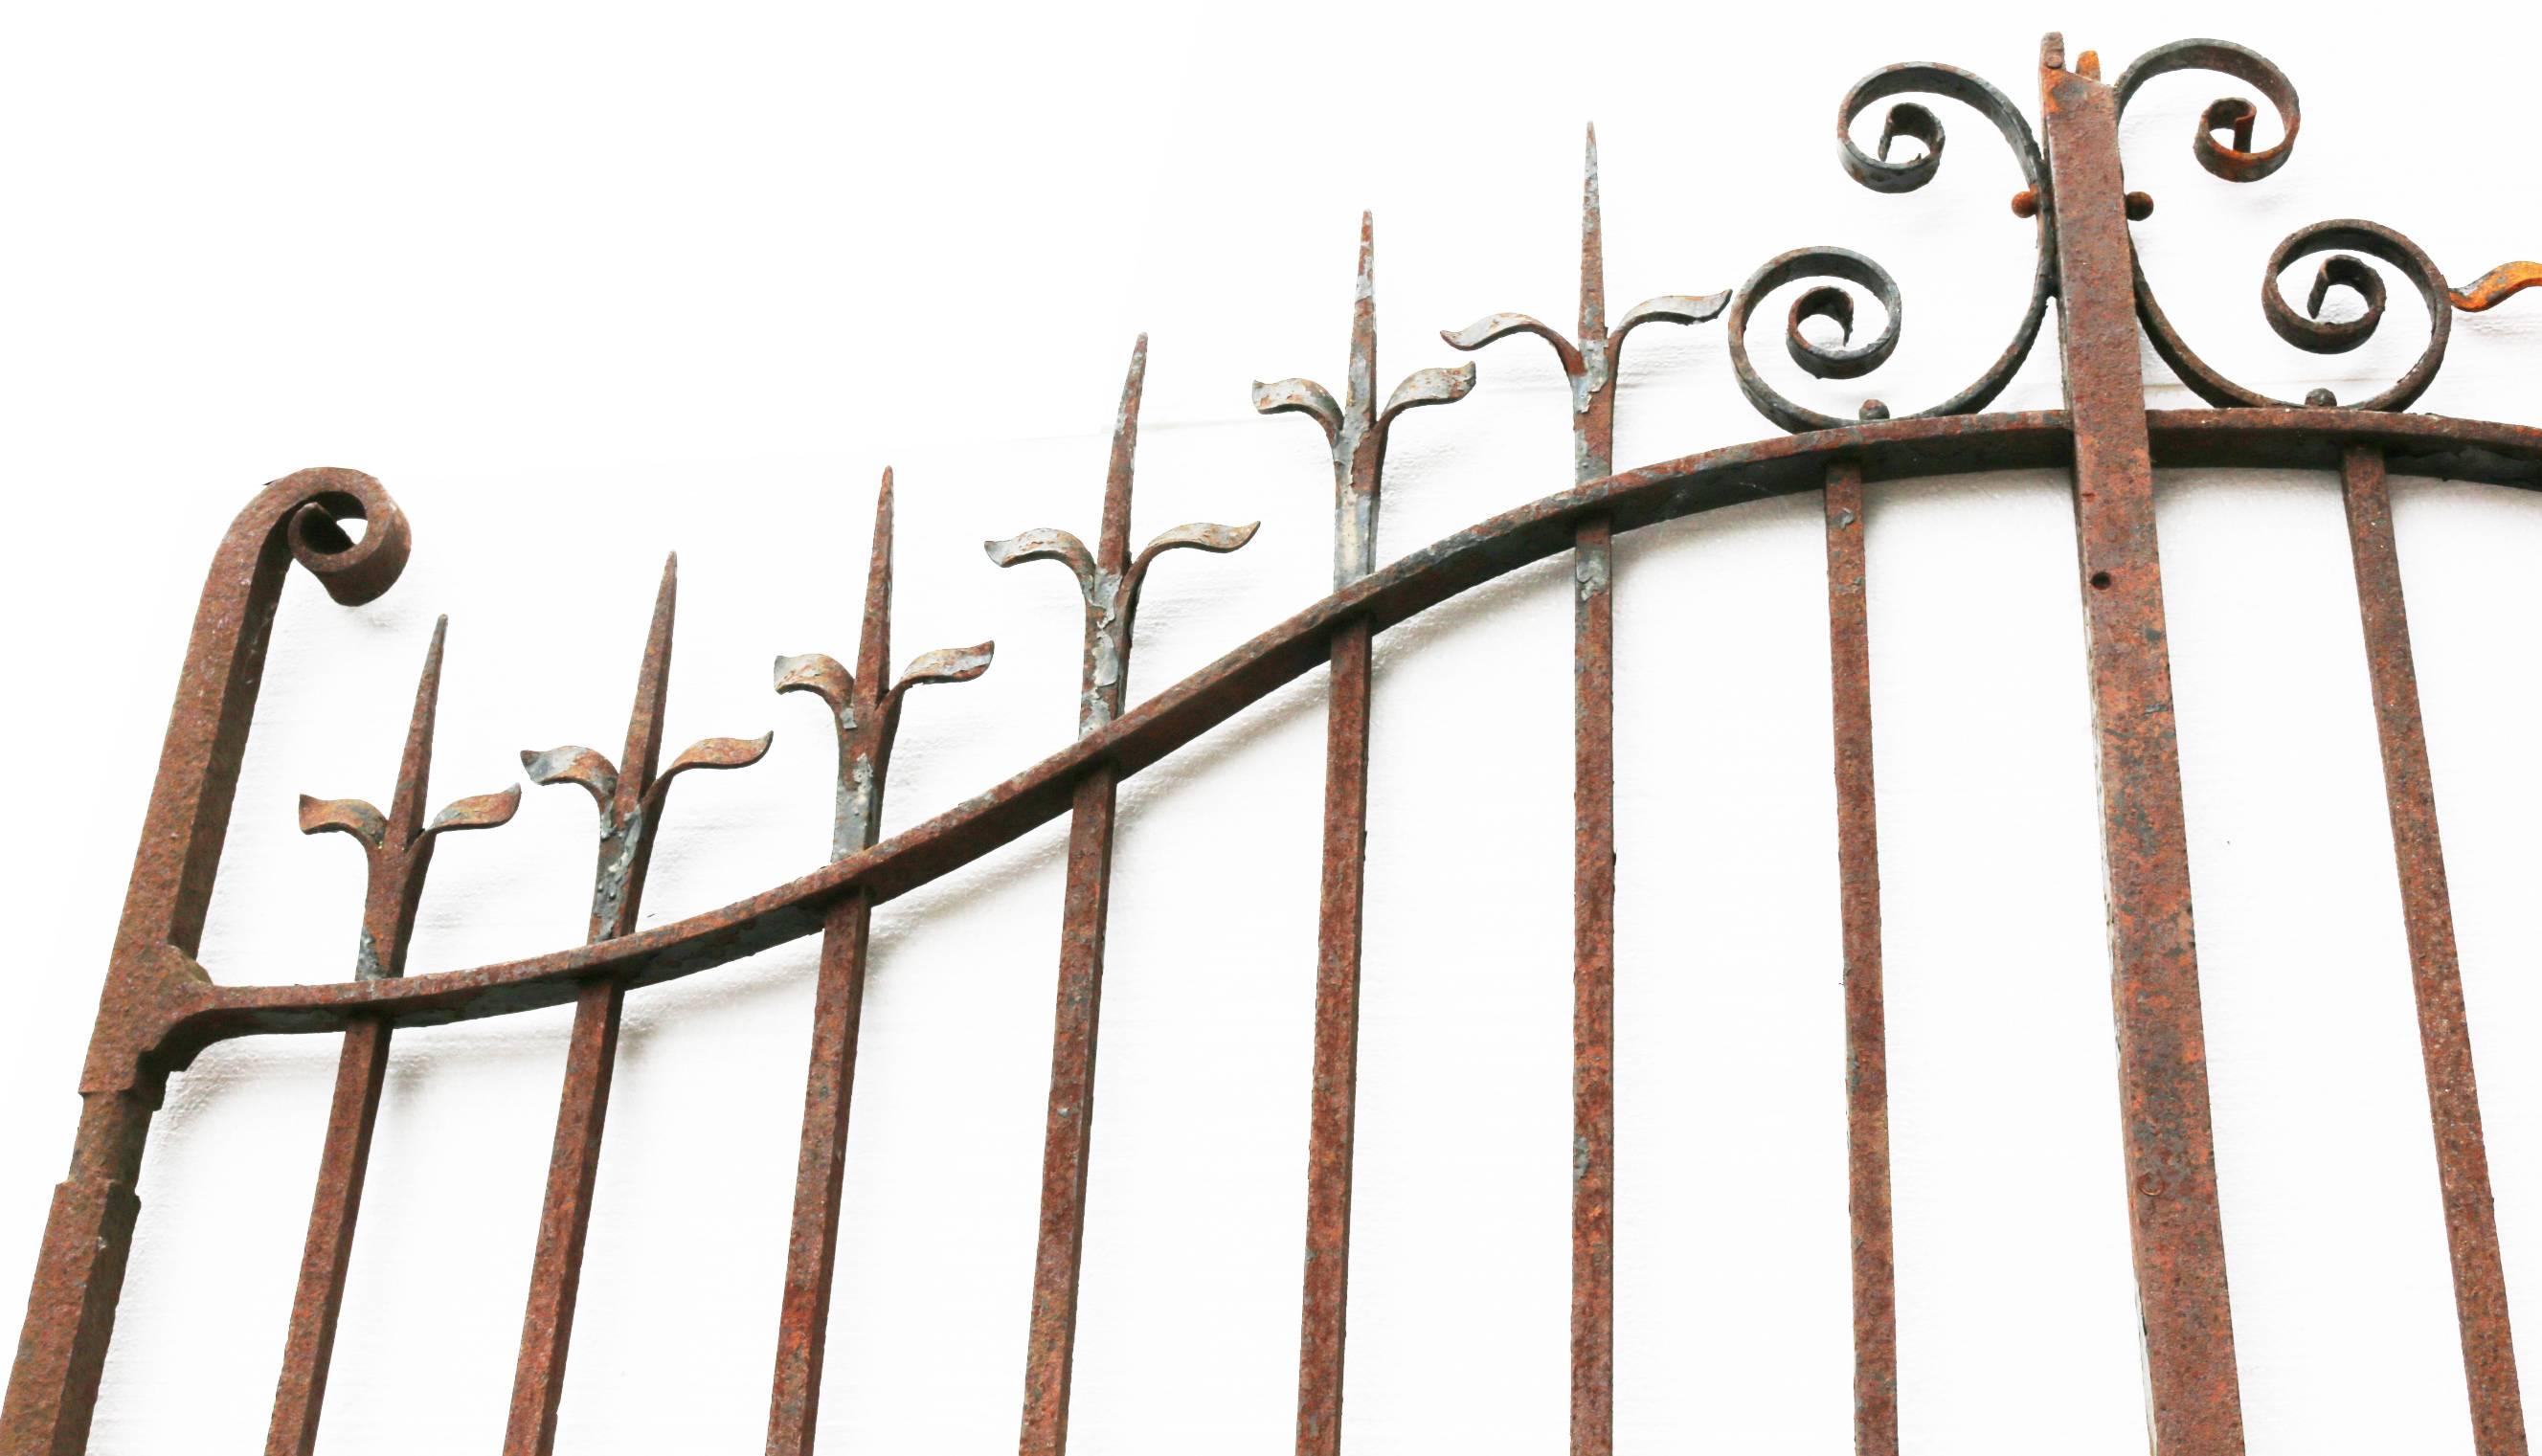 These gates are in good structural condition with a gate stay and a rust finish. They do not have hinges or a latch.
Measures: Height 270 cm
Width 222 cm
Depth 3.5 cm.